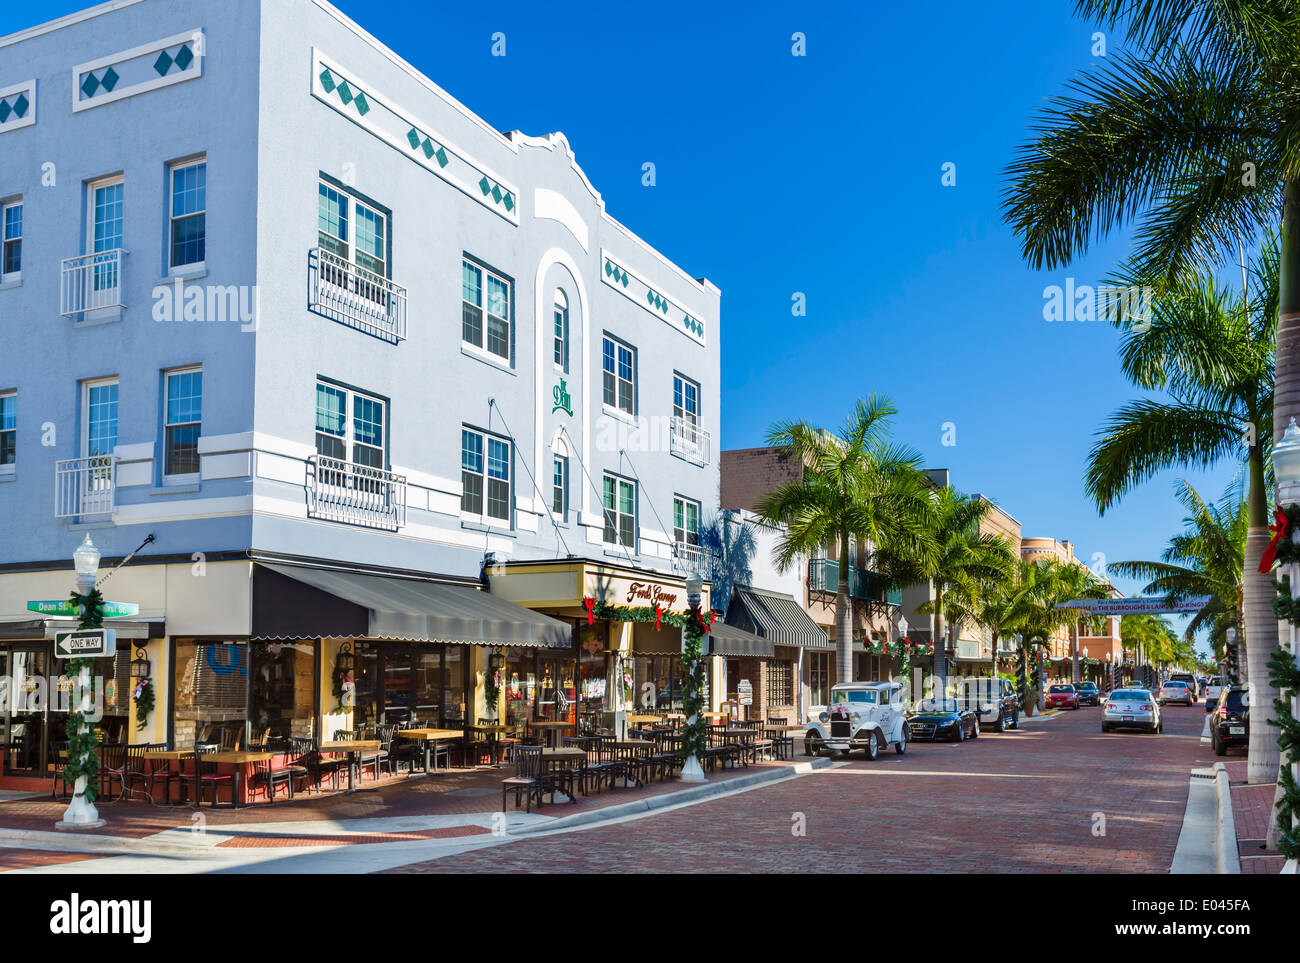 The historic Dean Building and Ford's Garage burger restaurant on First Street in downtown Fort Myers, Florida, USA Stock Photo